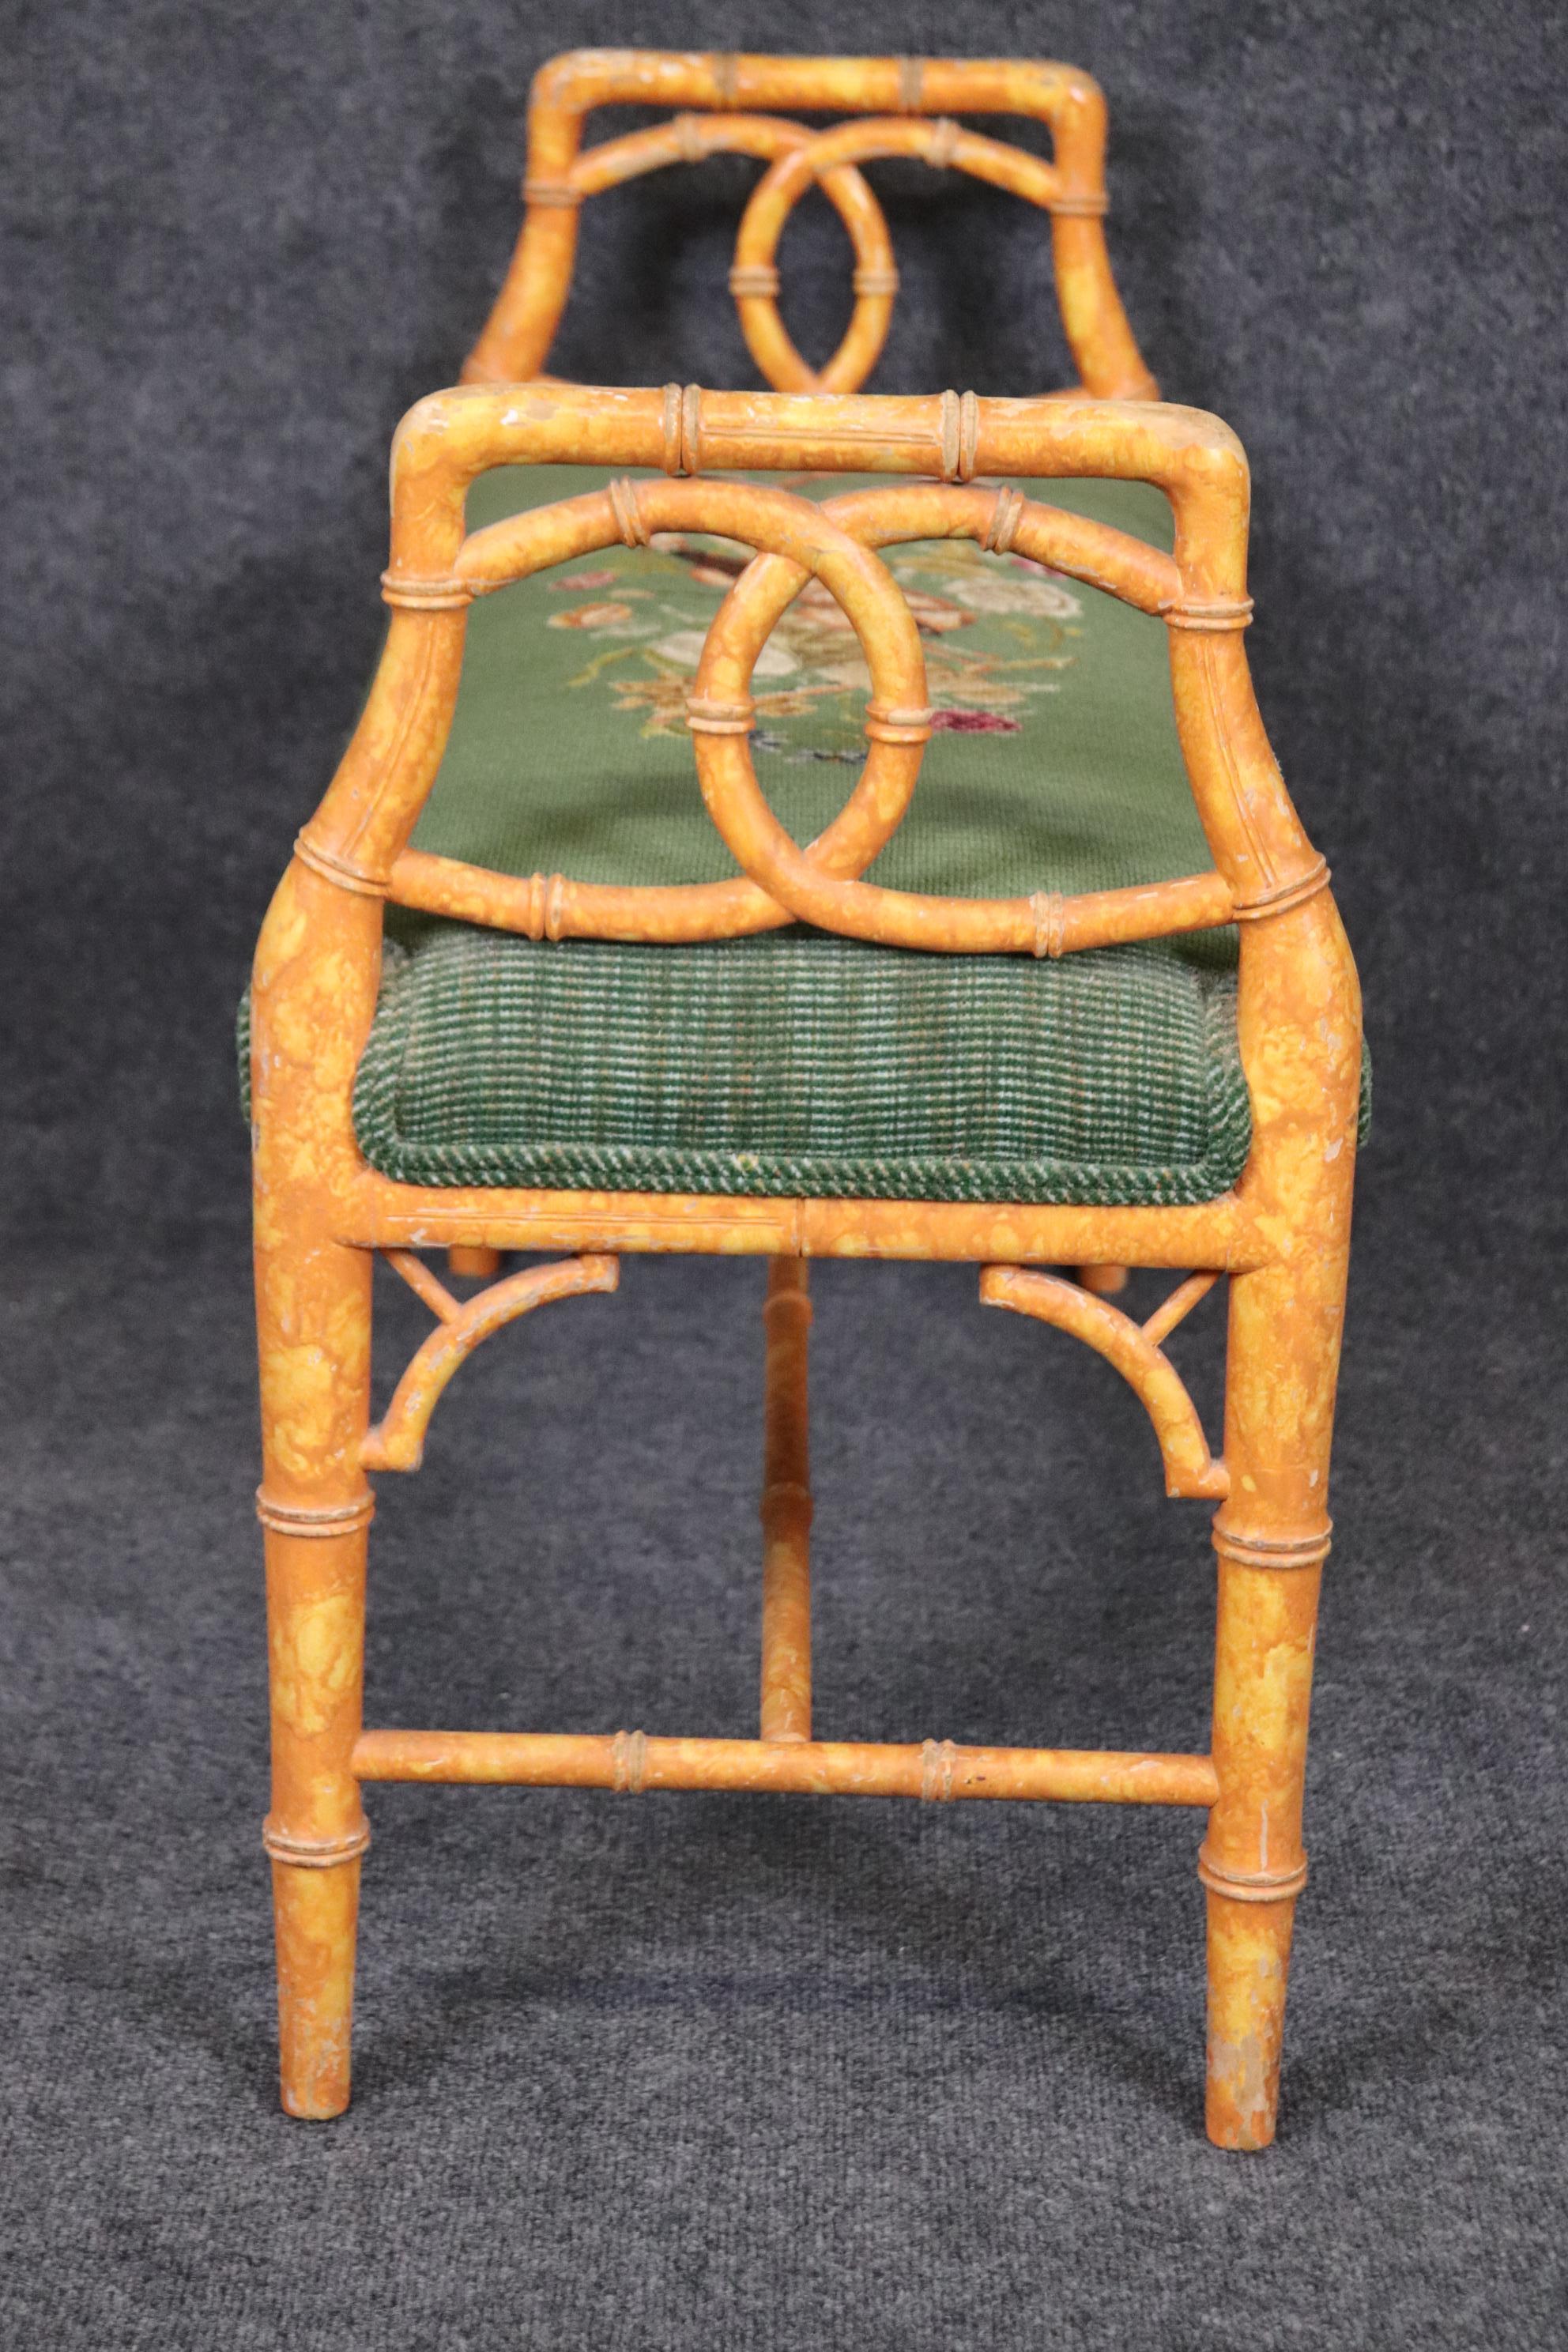 Mid-20th Century Faux Bamboo Paint Decorated Window Bench Stool with Needlepoint Upholstery For Sale